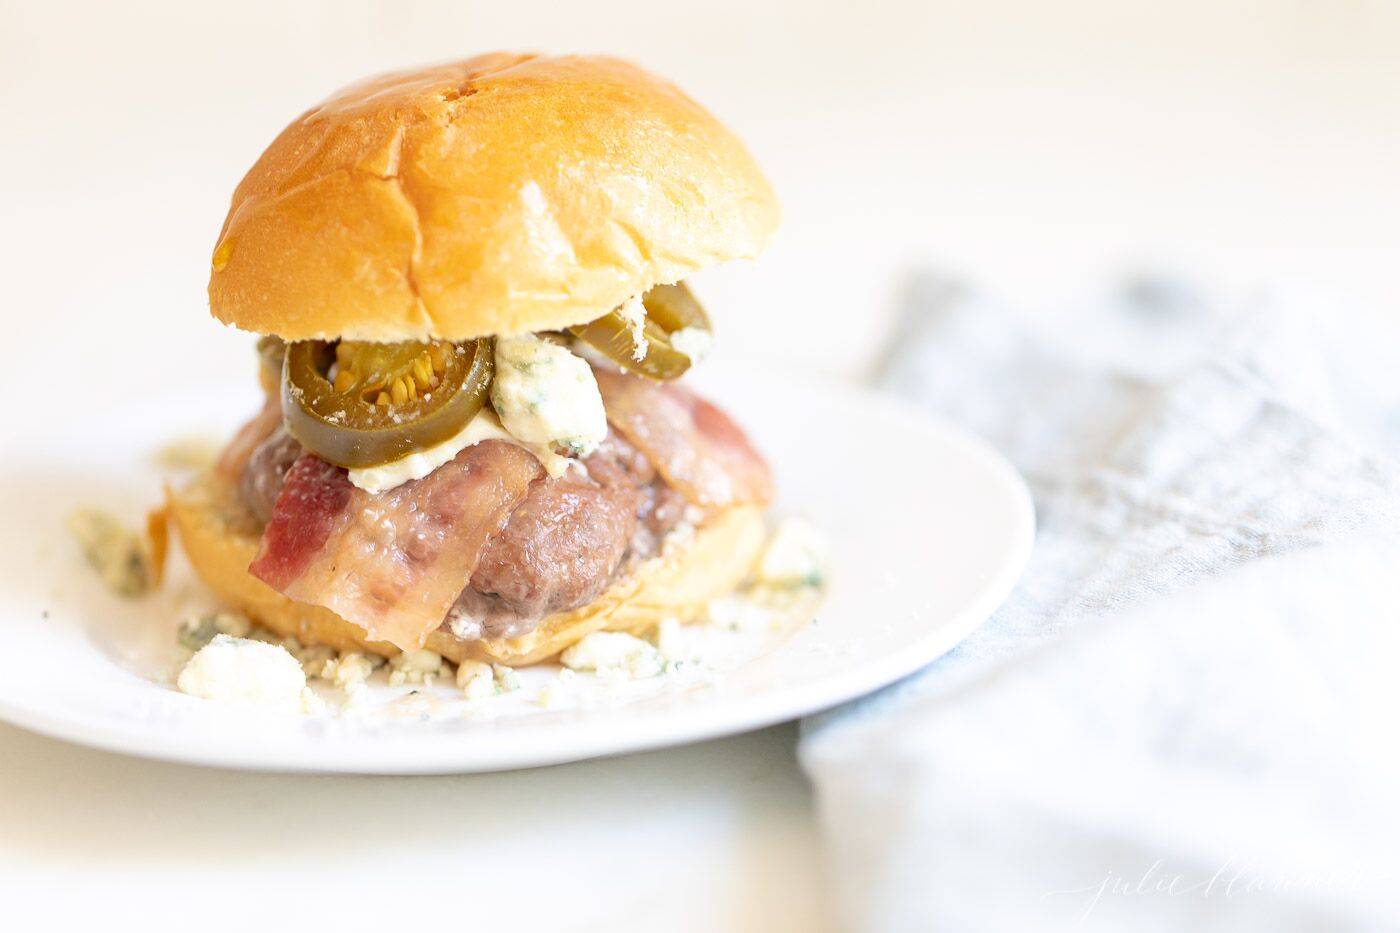 Mini slider close-up, with bacon, cheese and jalapenos. #sliders